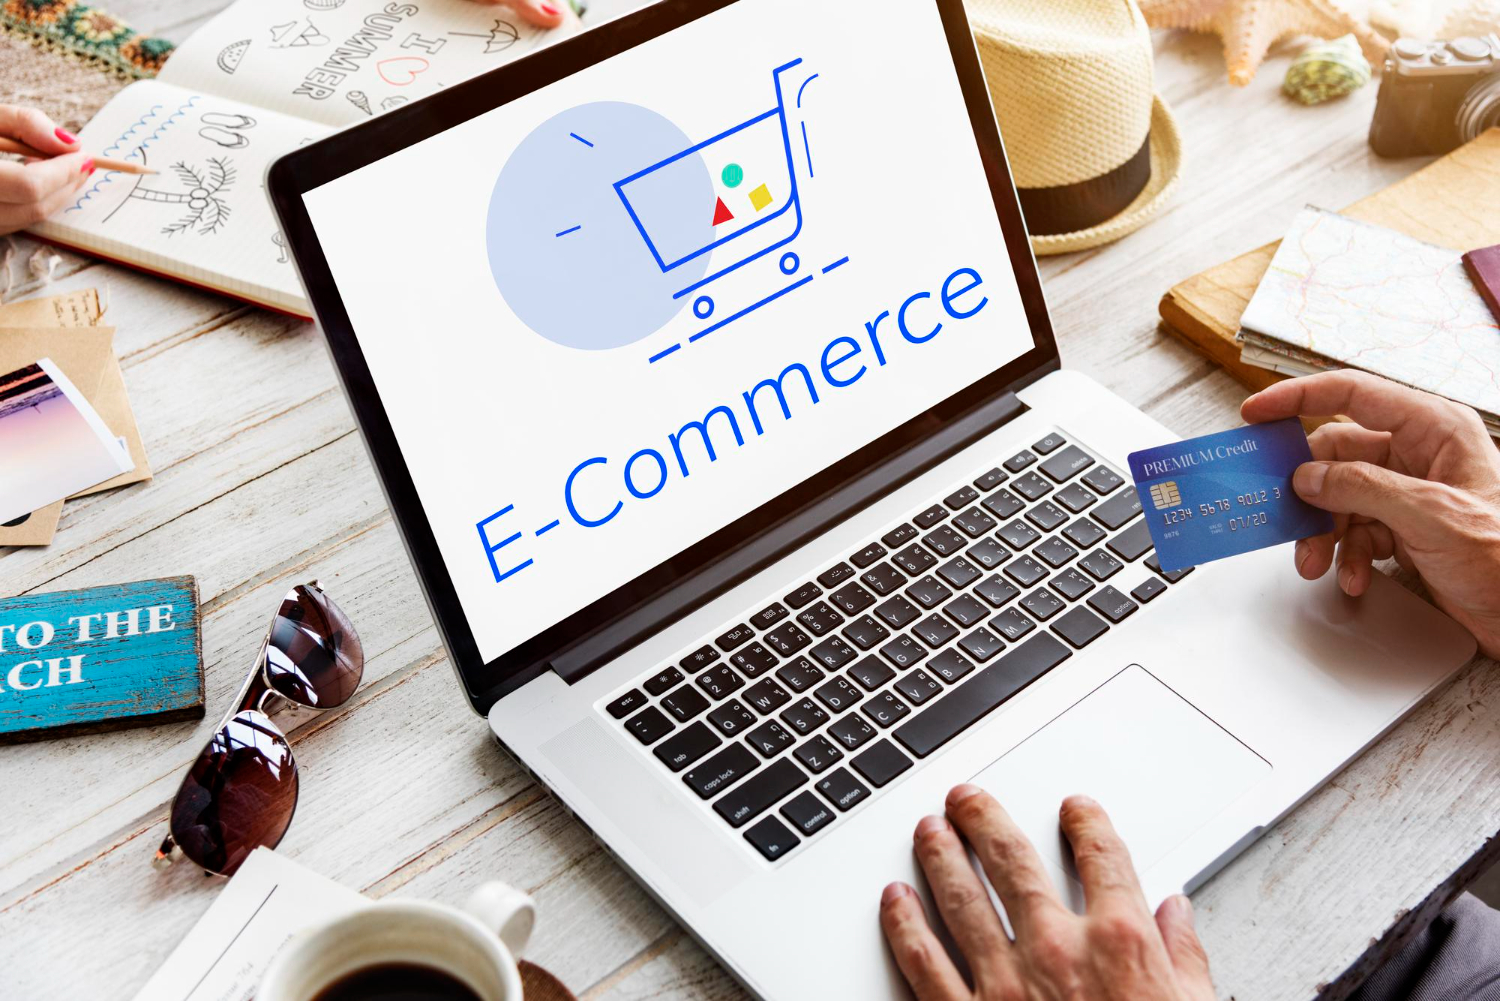 How To Build A Professional E-Commerce Website